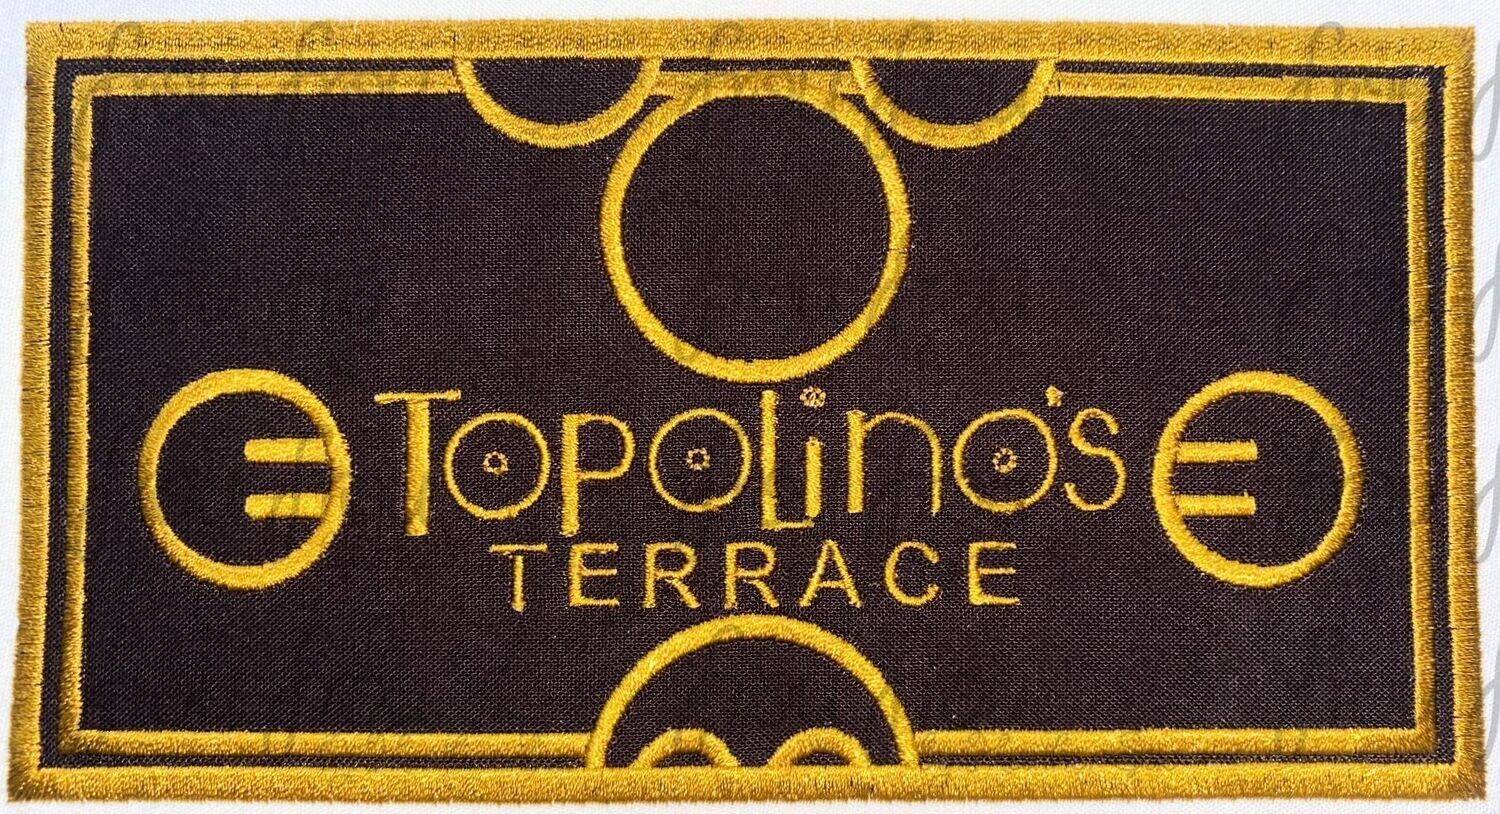 Top Olino's Terrace Restaurant Machine Applique and filled Embroidery Design, multiple sizes including 3.5